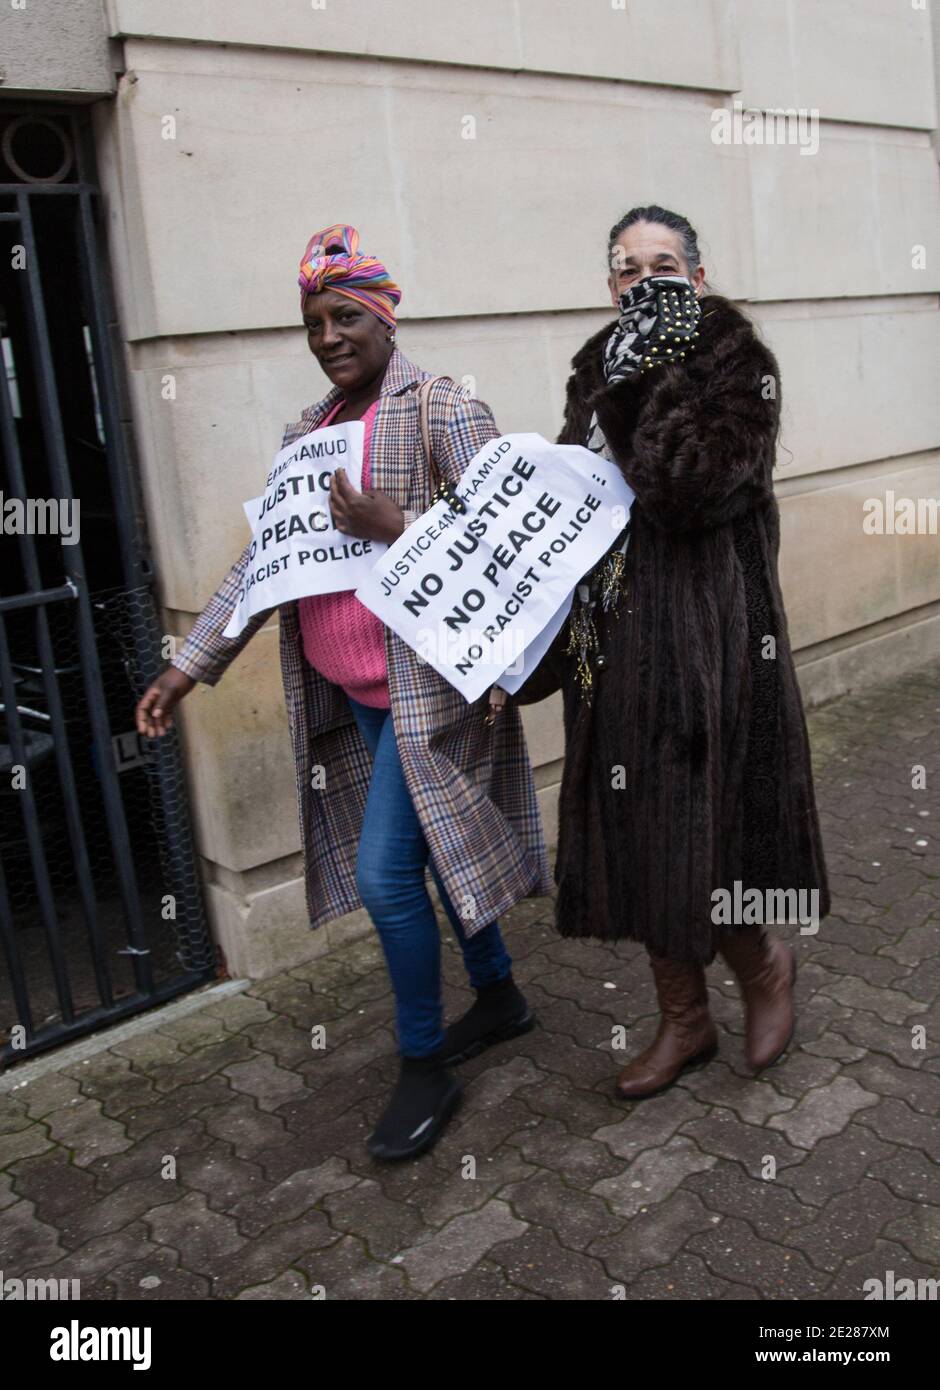 #Justice4Mohamud community march on Cardiff Bay police station, Tuesday 12 January, 2021 Stock Photo